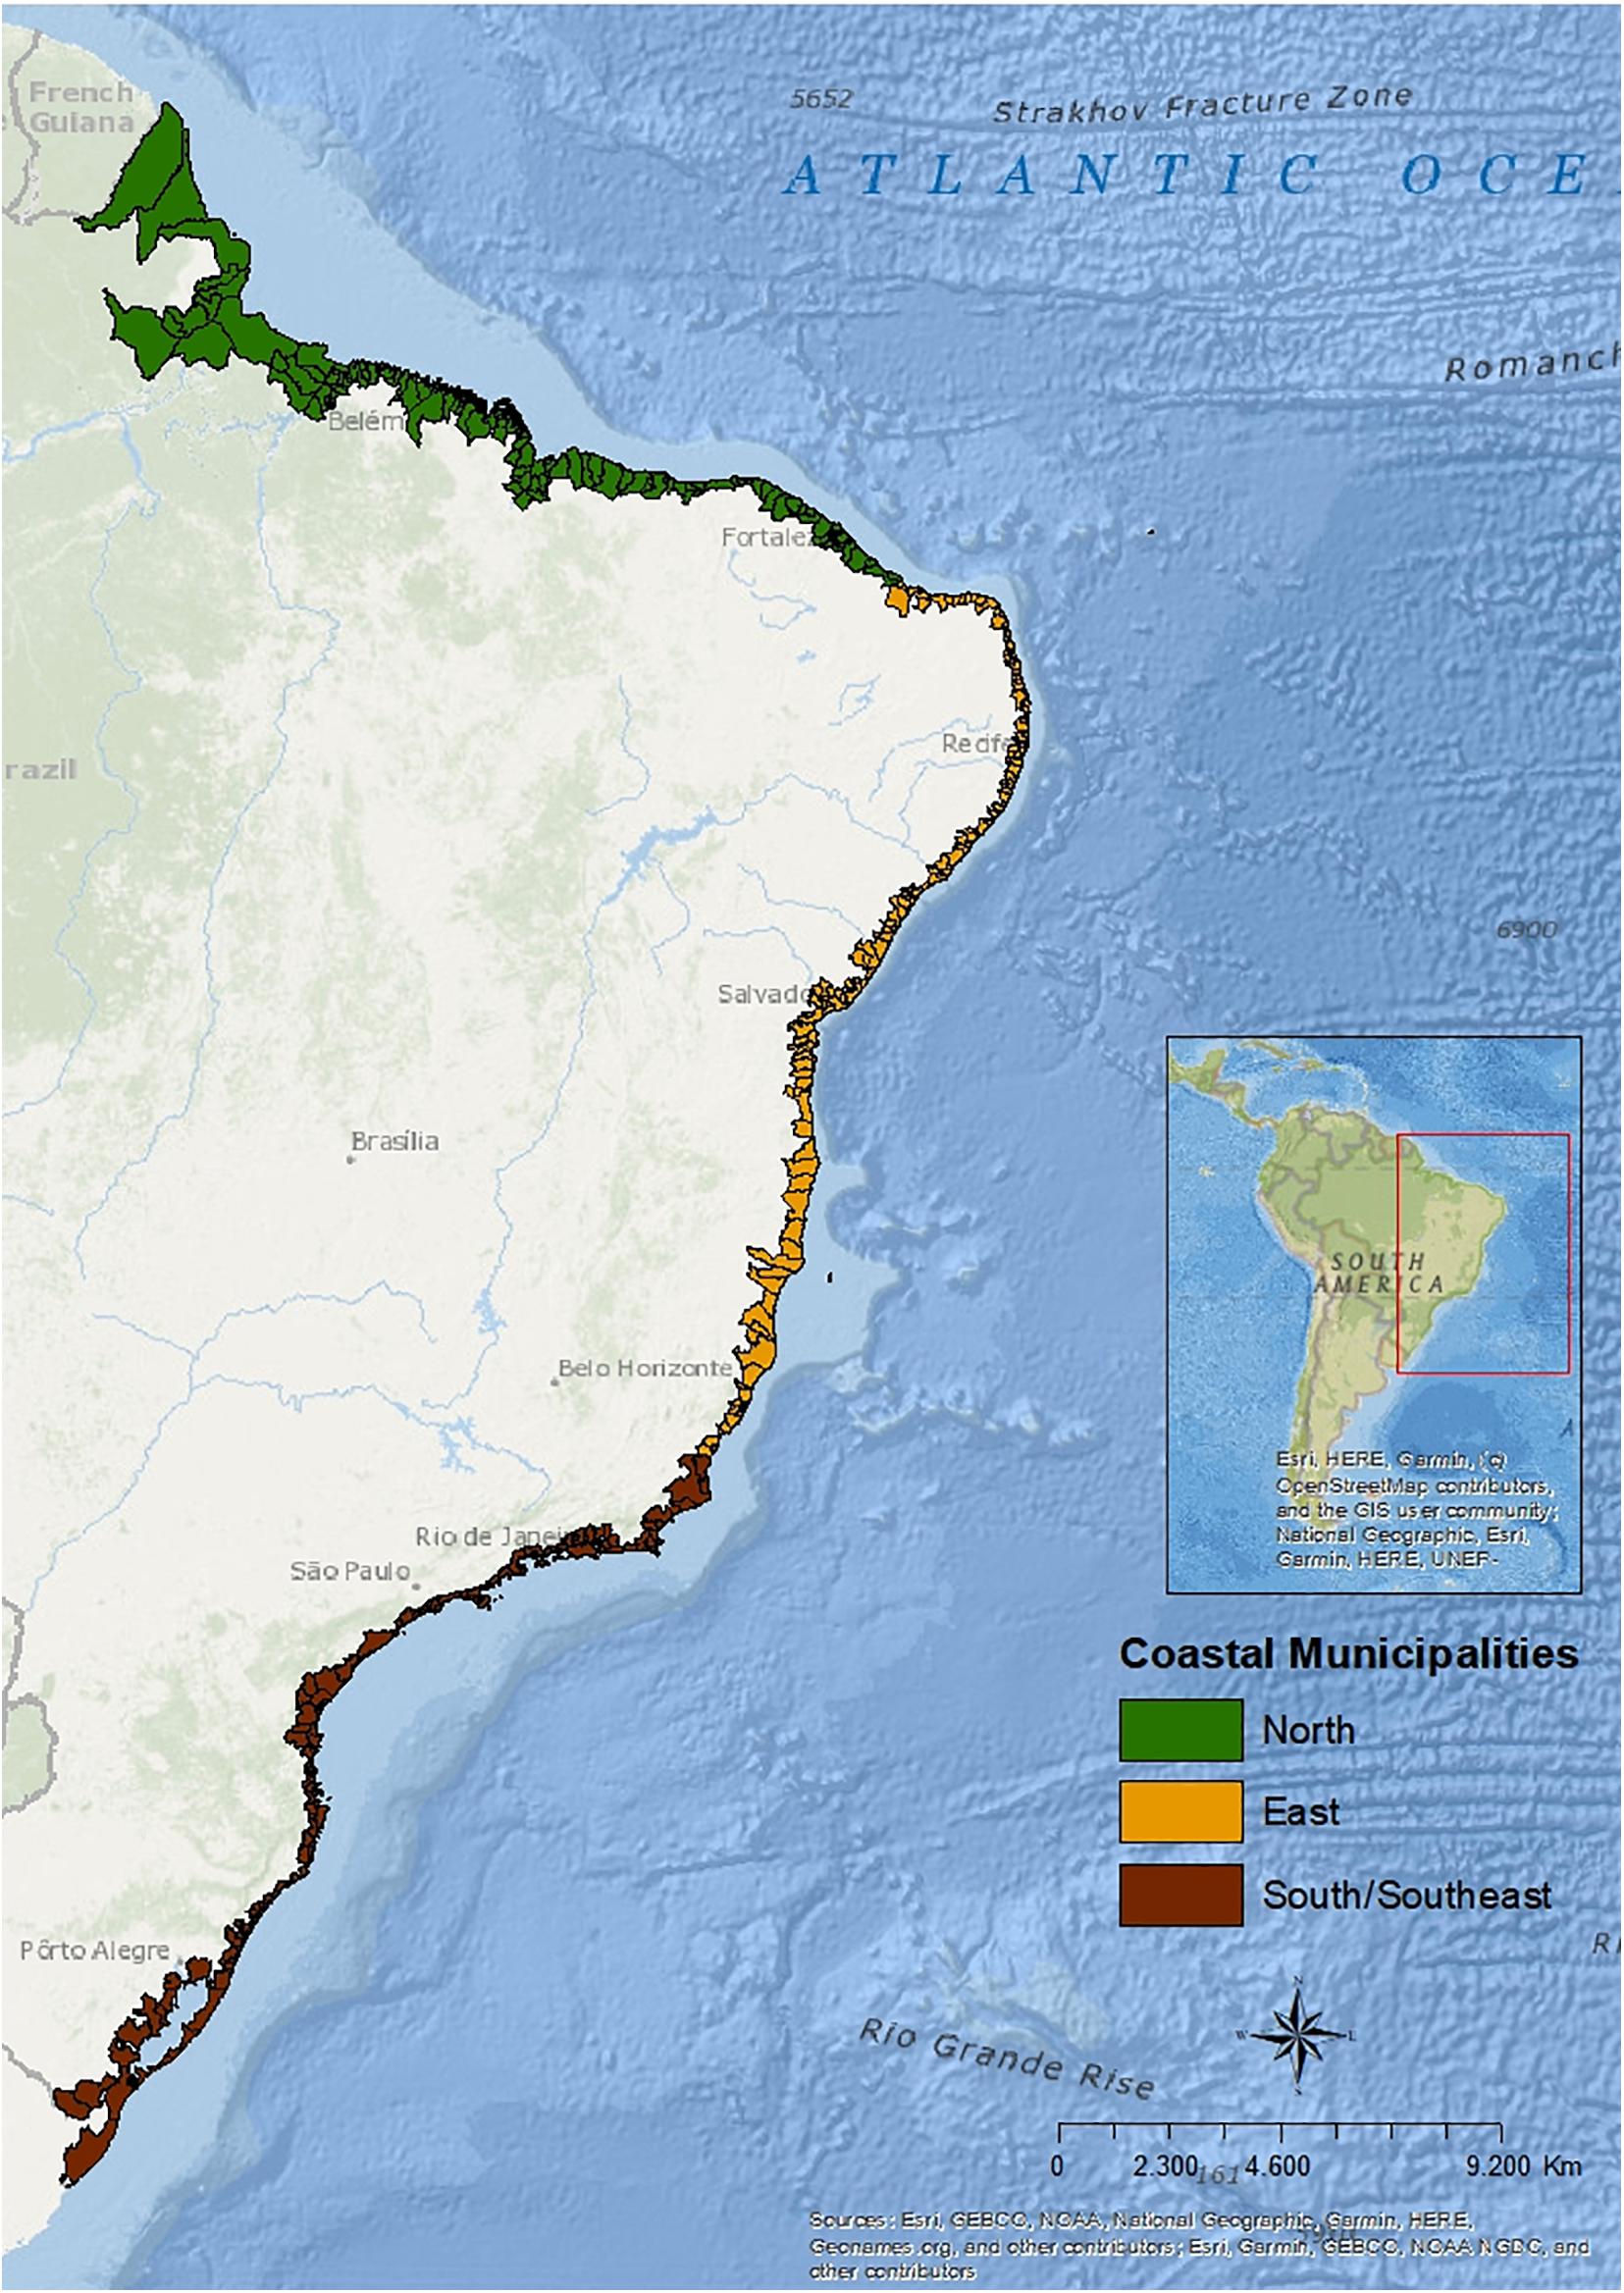 Ports analysed in the southeast region of Brazil